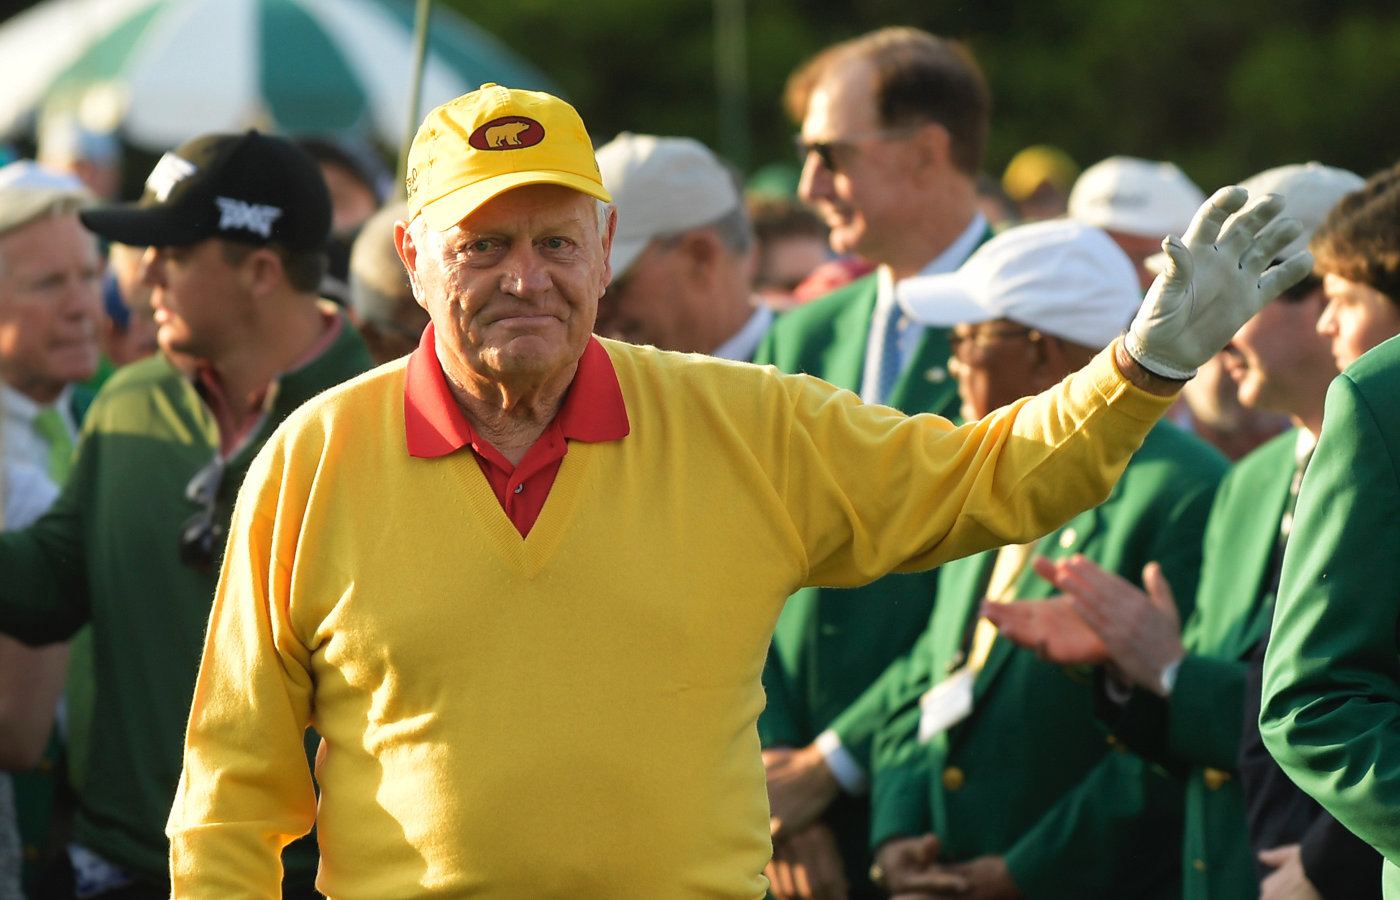 Jack Nicklaus during the first round of the 2019 Masters Tournament held in Augusta, GA.